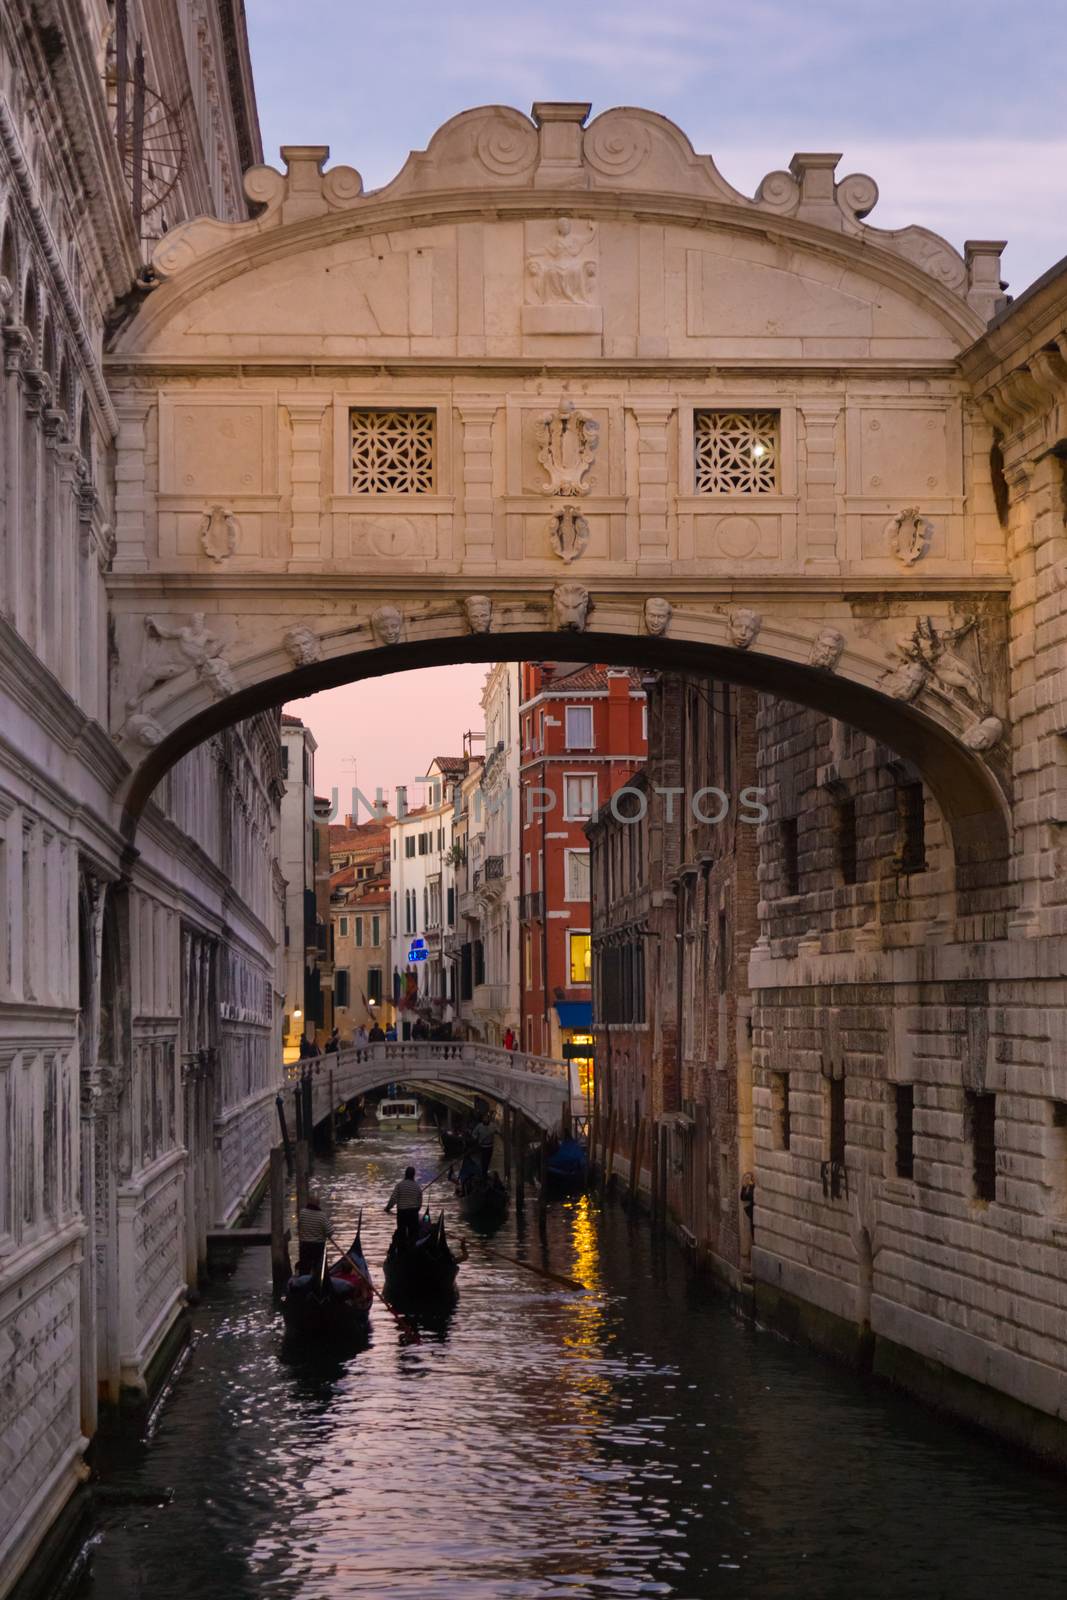 Gondolas passing under Bridge of Sighs, Ponte dei Sospiri. A legend says that lovers will be granted eternal love if they kiss on a gondola at sunset under the Bridge. Venice,Veneto, Italy, Europe. 